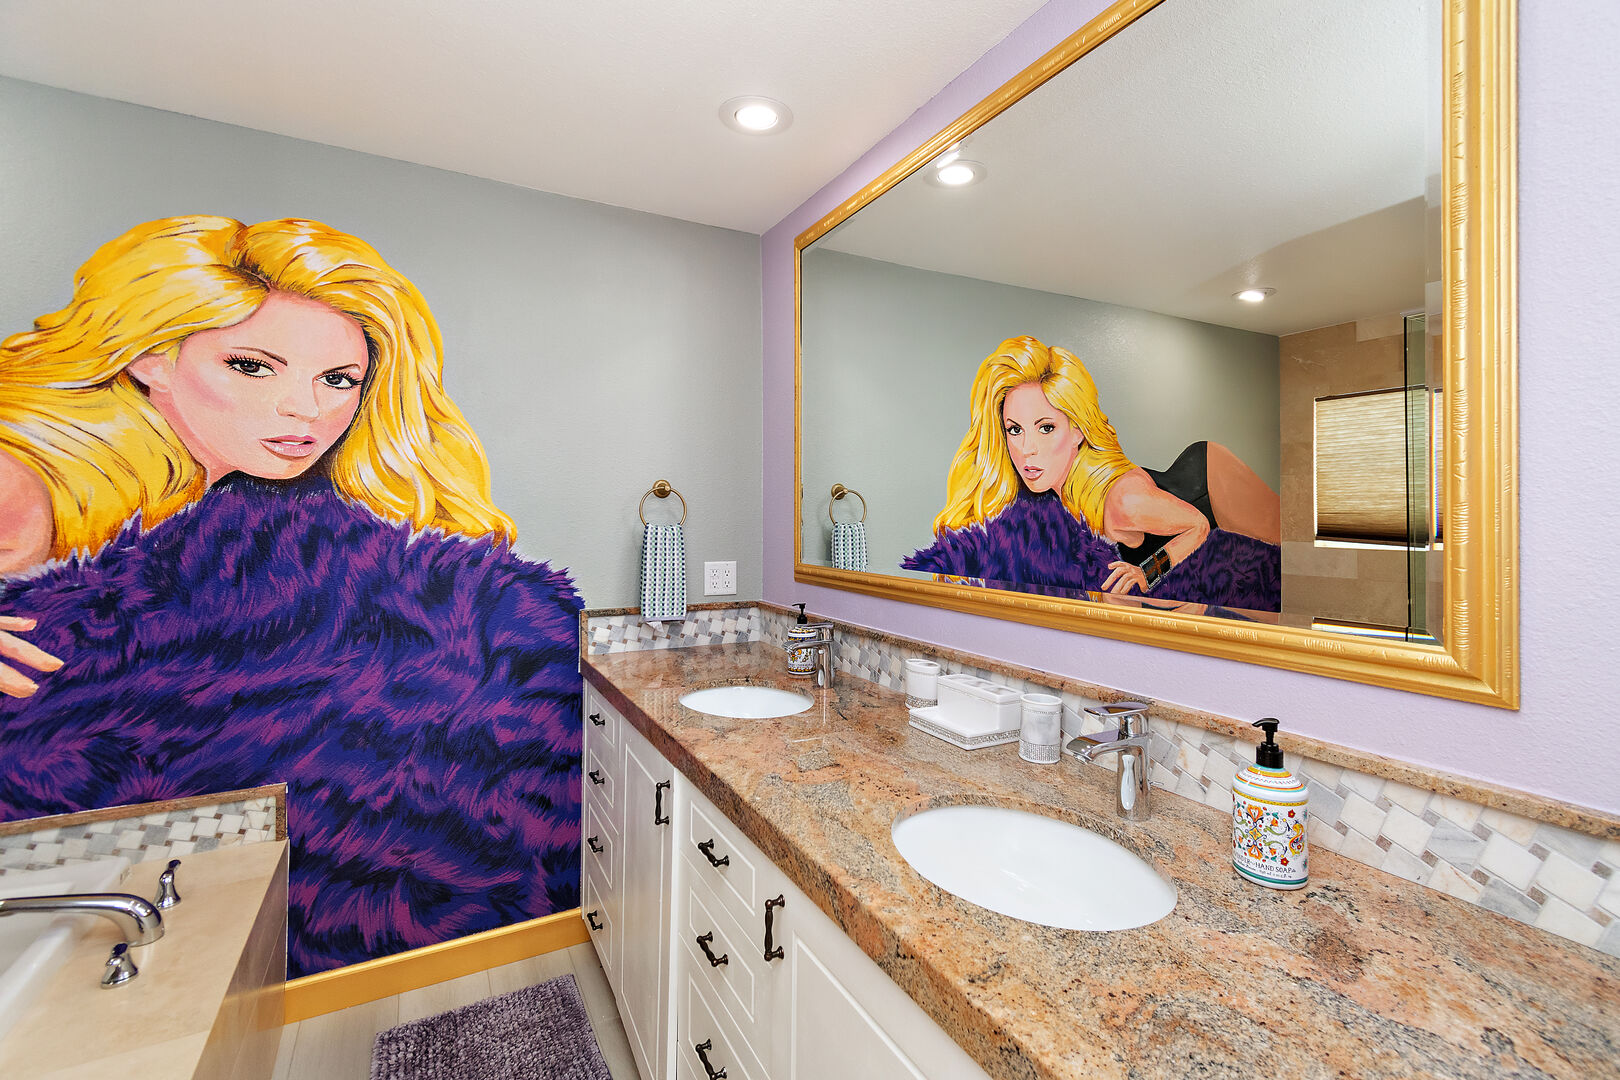 The private, en suite bathroom features a soaking tub, tile shower, and double vanity sinks, while a captivating mural of Shakira adds a unique touch to the space.